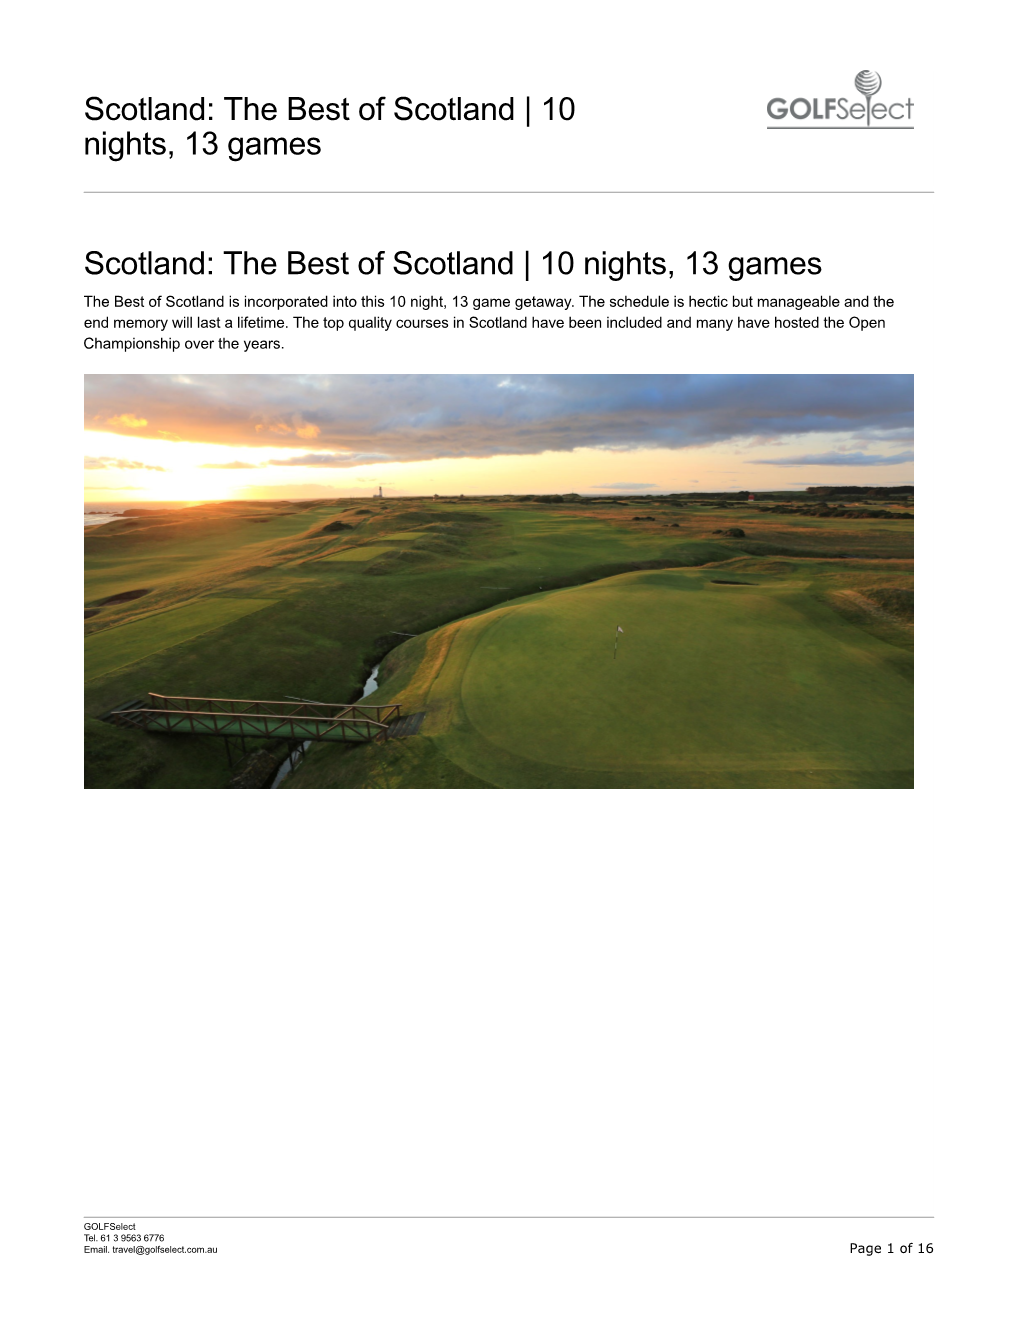 The Best of Scotland | 10 Nights, 13 Games